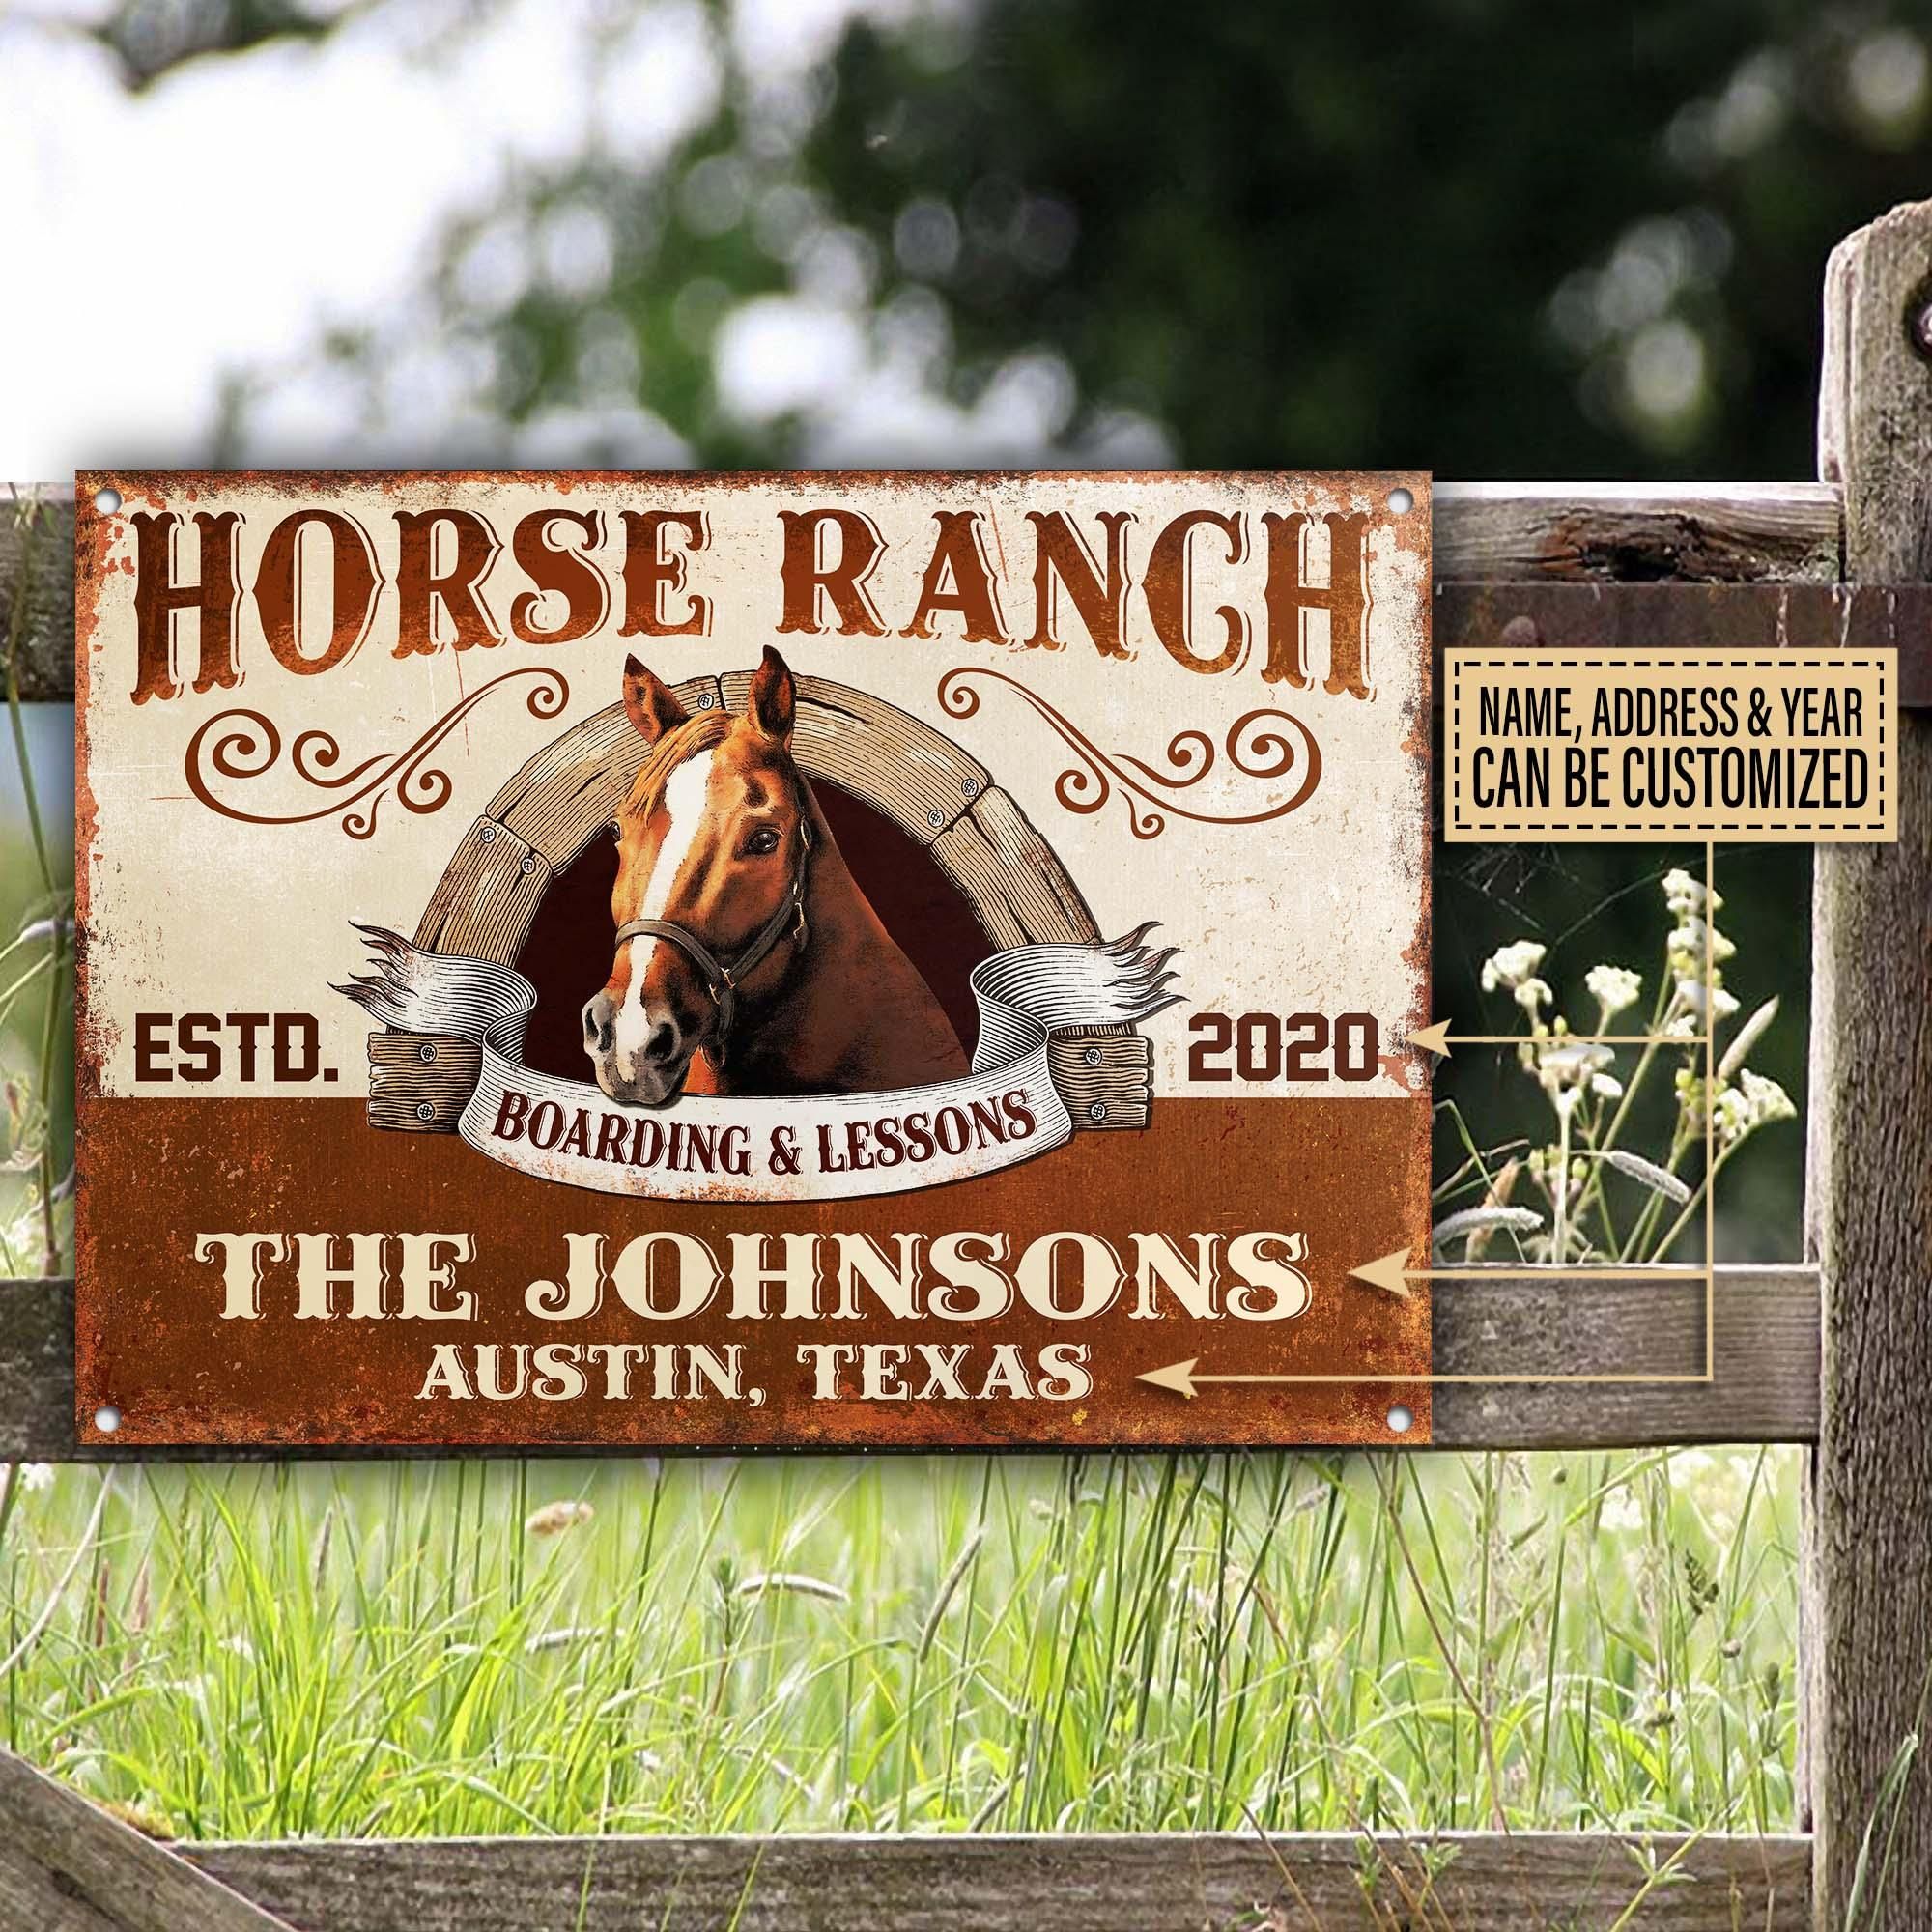 Personalized Horse Ranch Boarding & Lessons Customized Classic Metal Signs